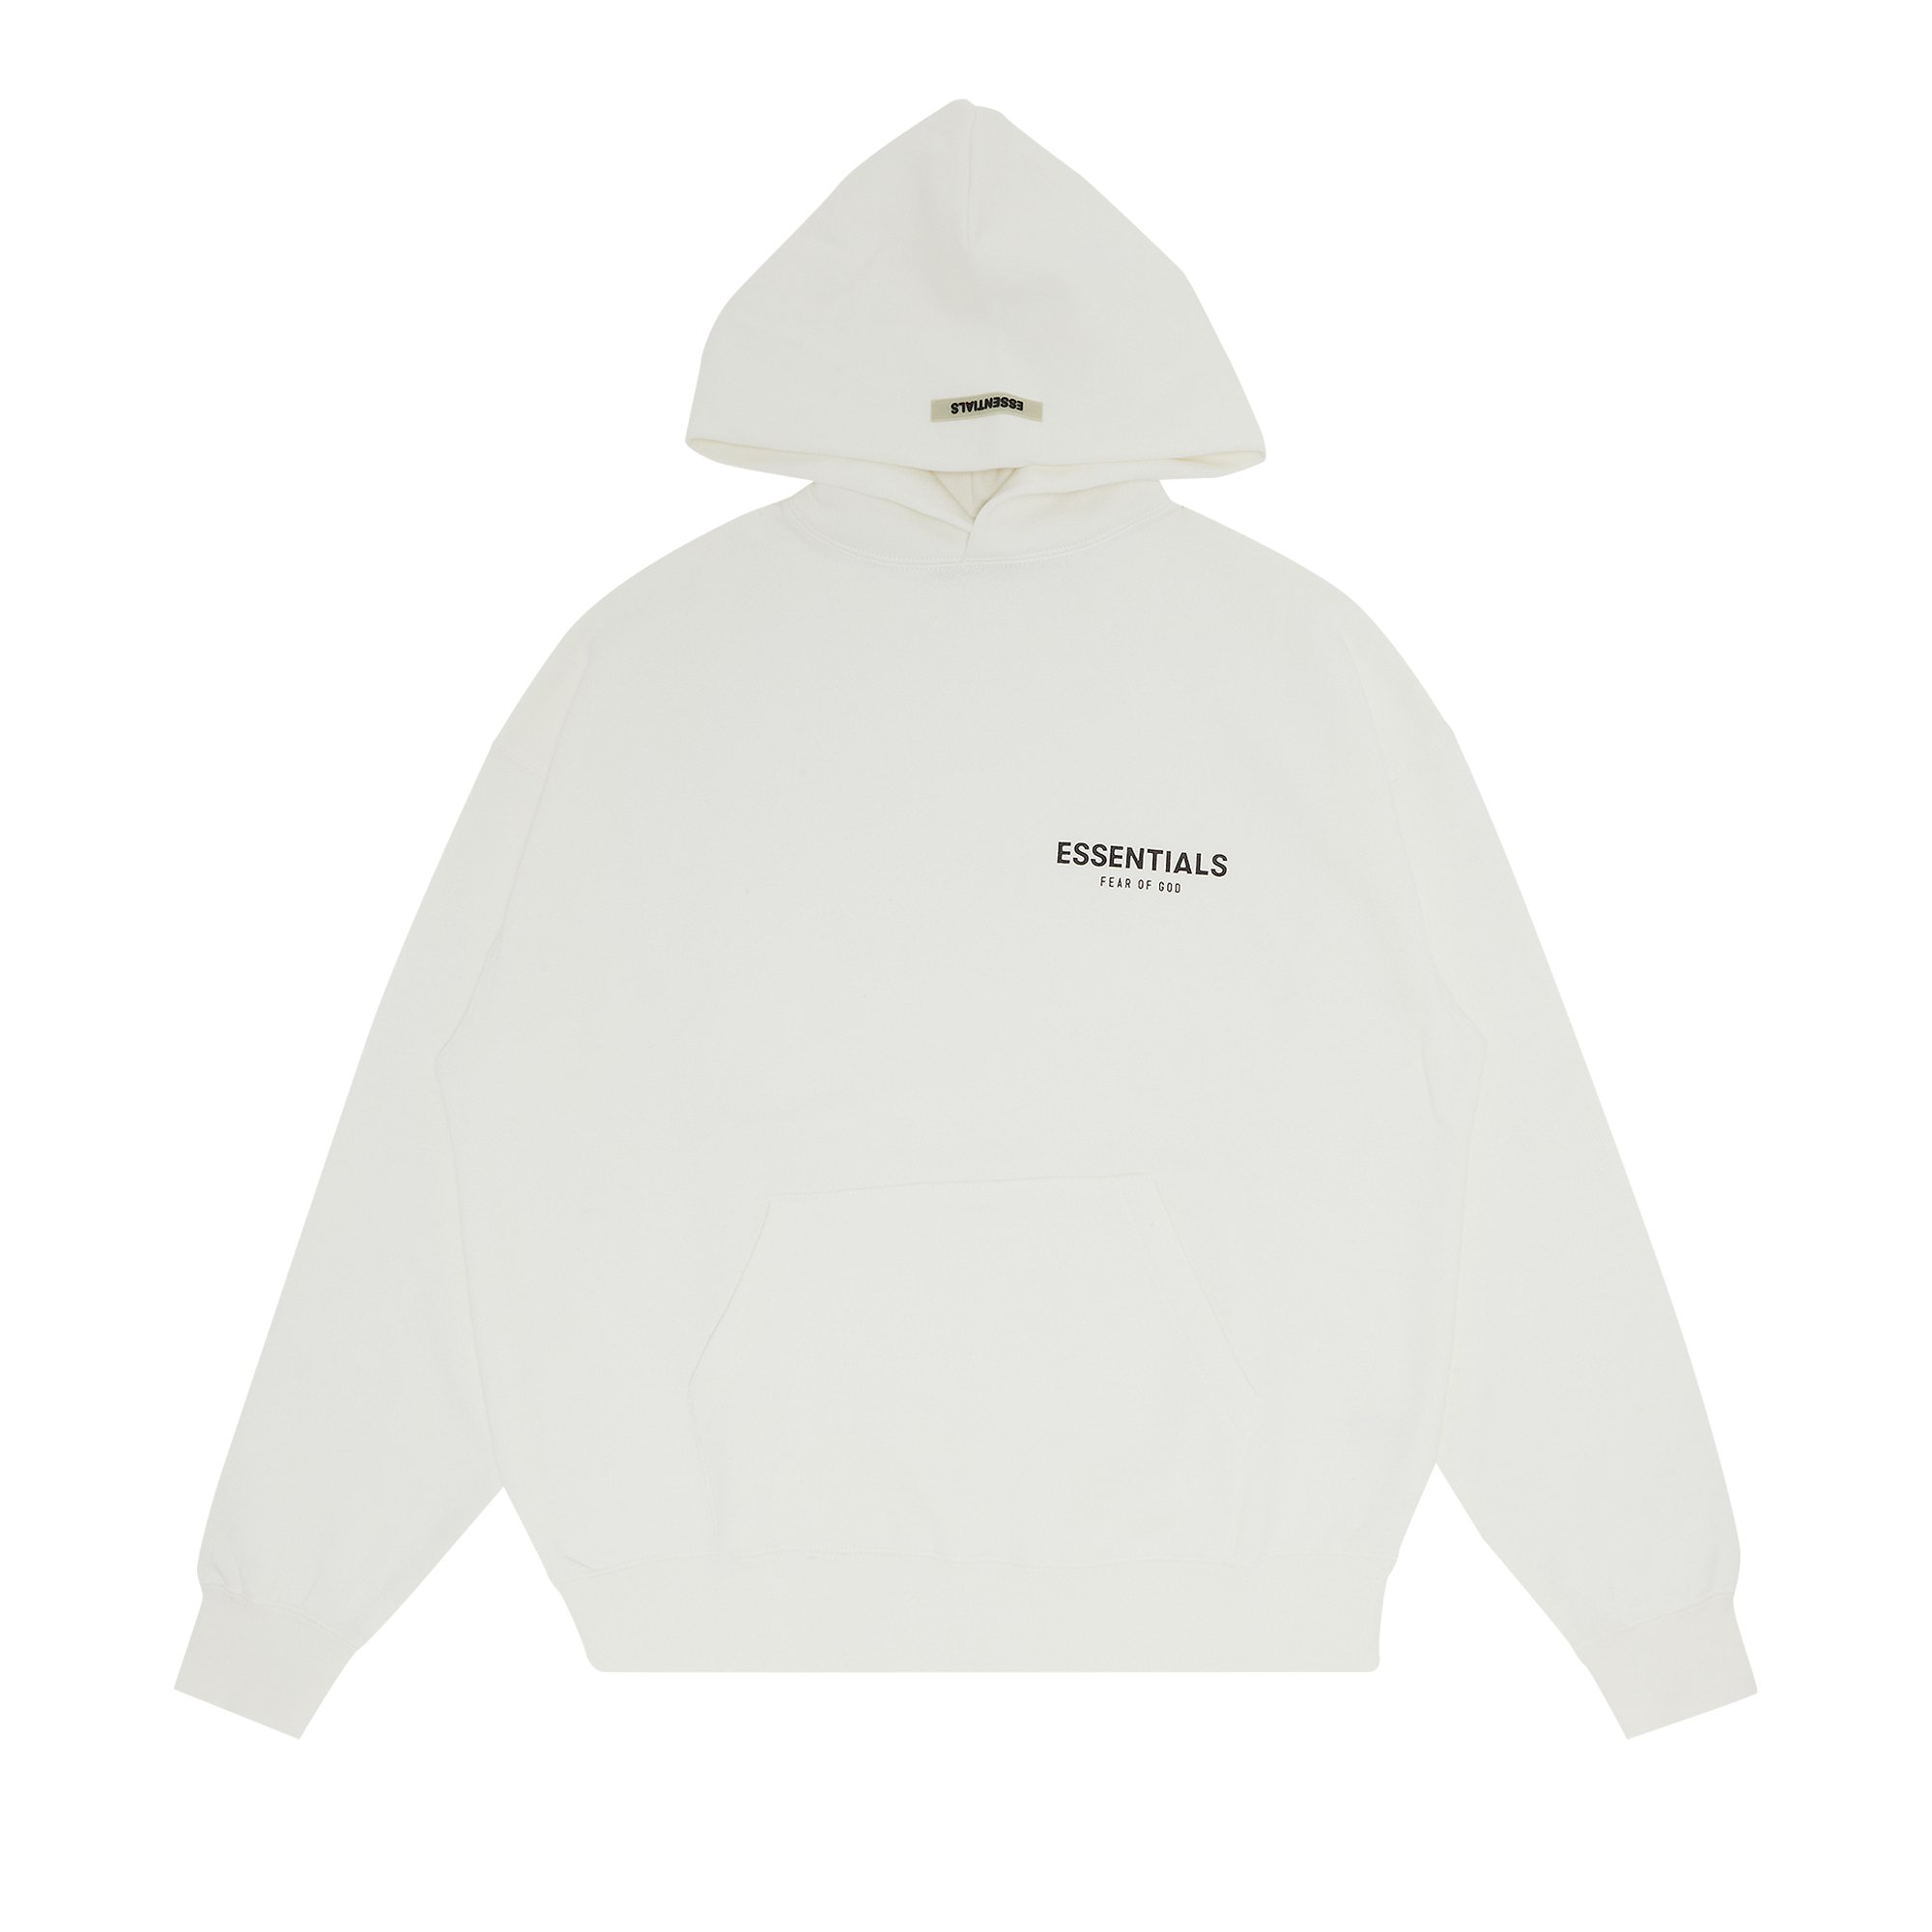 Buy Fear of God Essentials Photo Series Hoodie 'White' - 0192 25050 0076  010 | GOAT